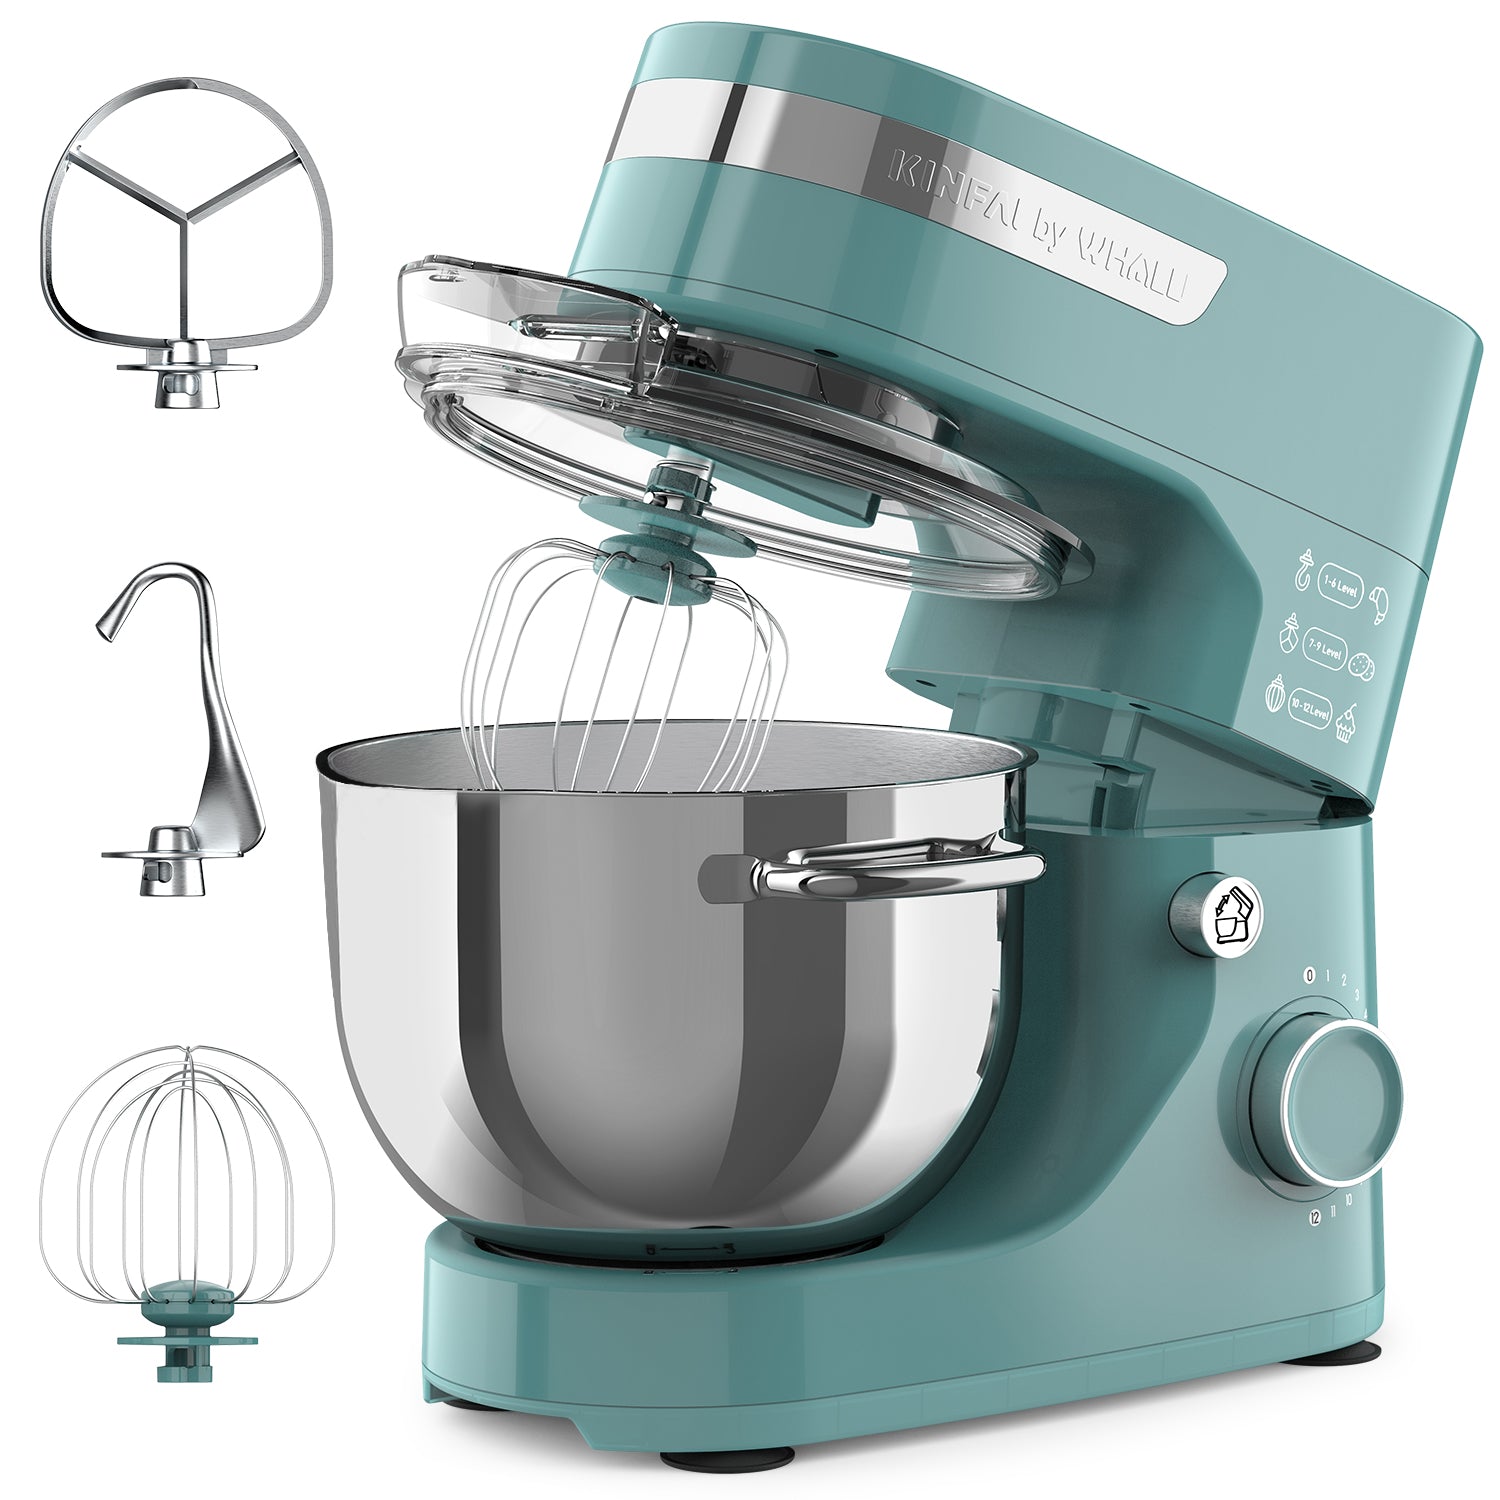 WHALL® Stand Mixer - 5.5Qt 12-Speed Tilt-Head Electric Kitchen Mixer with Dough Hook/Wire Whip/Beater, Stainless Steel Bowl (green)